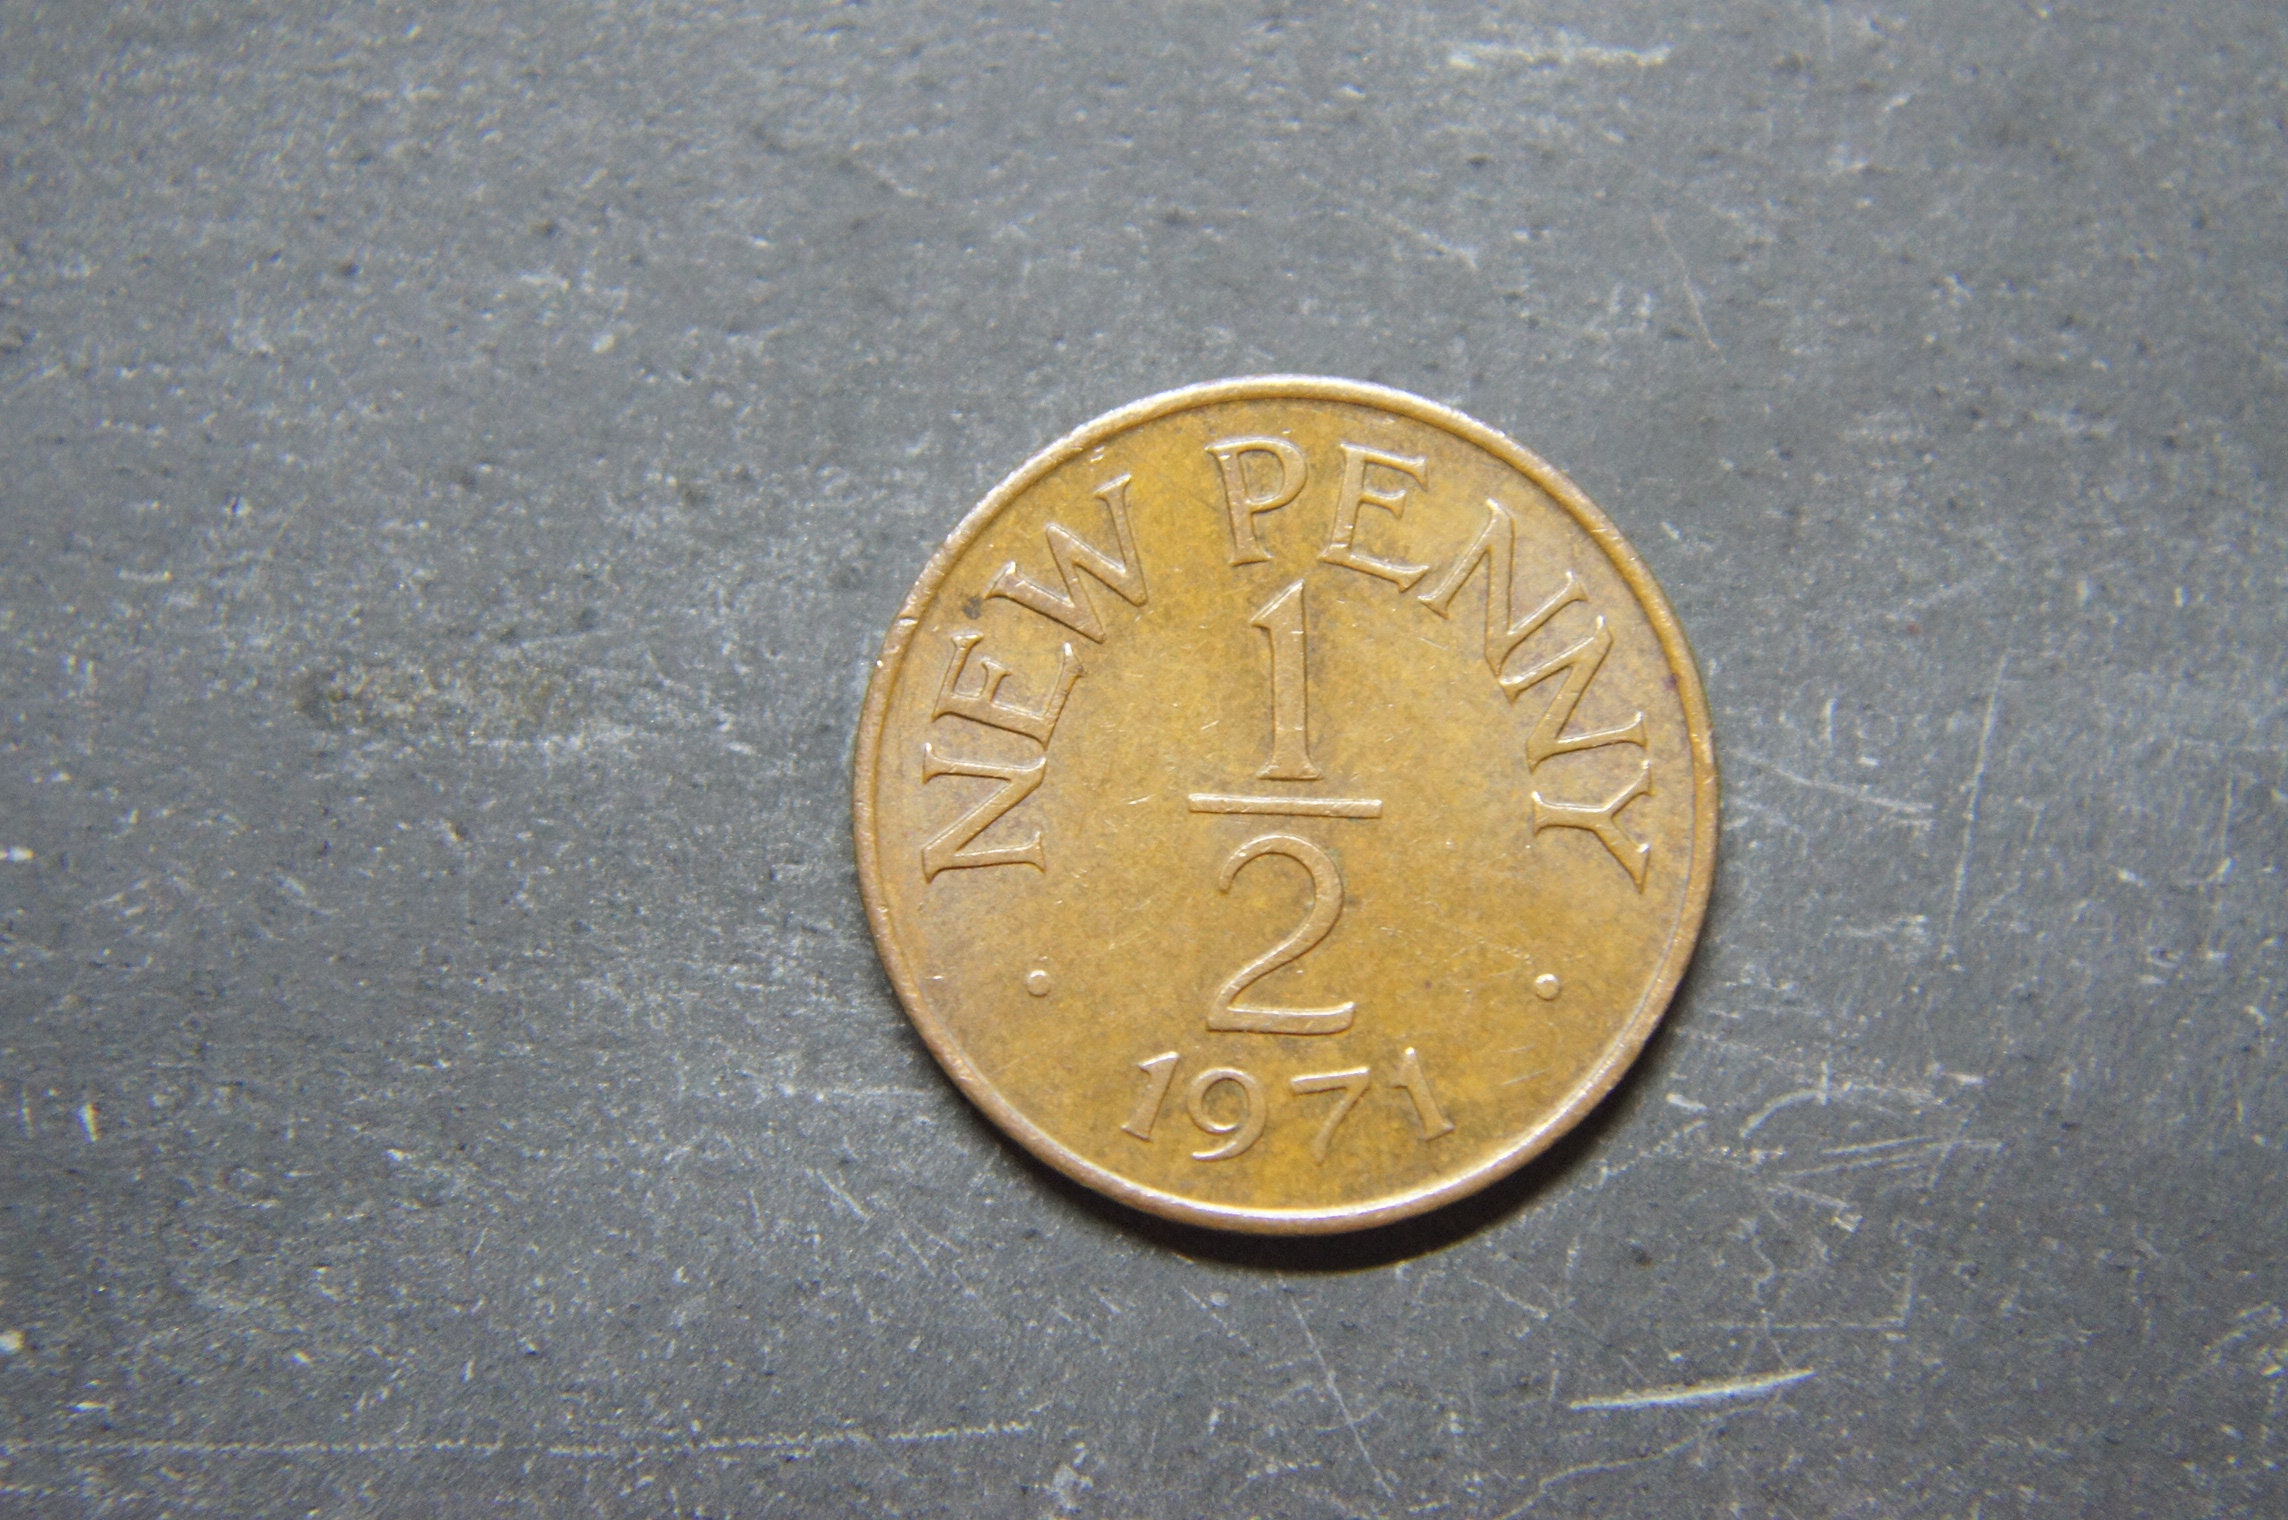 New Pence New Penny Vintage Rare Coins 1971 